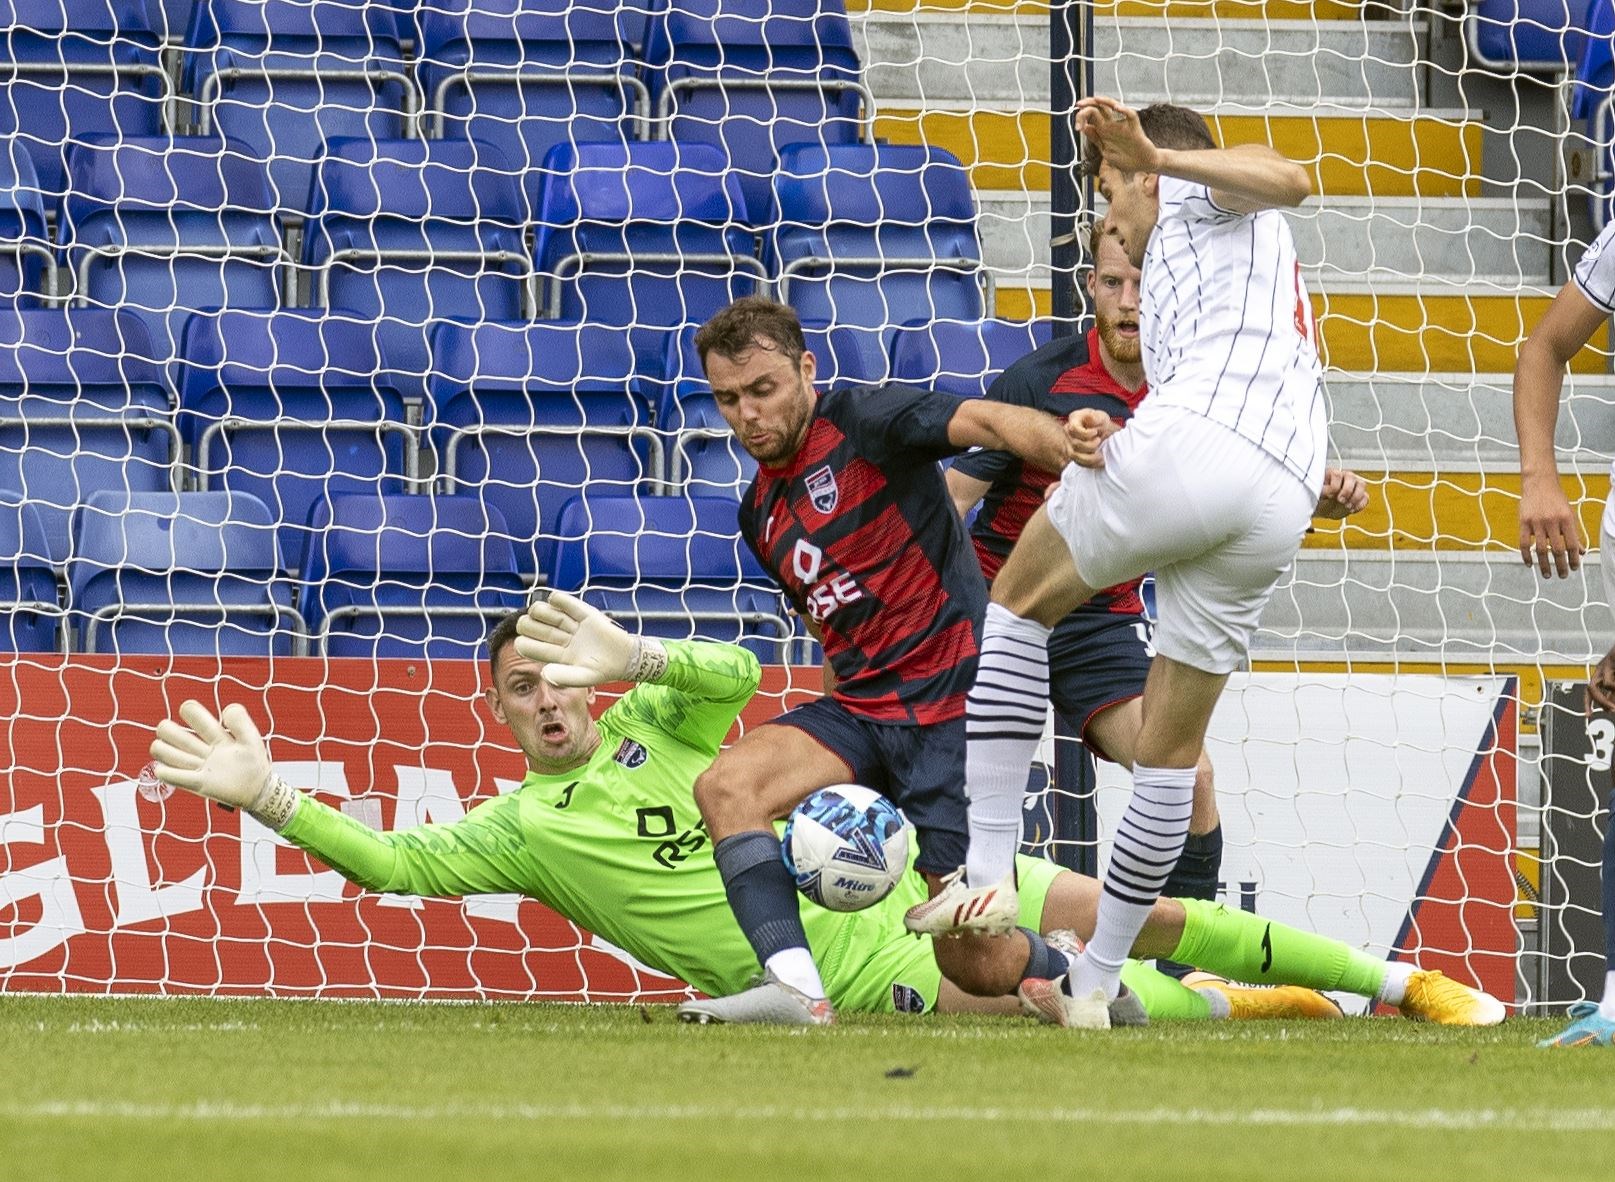 Ross County's Connor Randall blocks a shot from Dunfermline's Nikolay Todorov in this season's League Cup group clash.